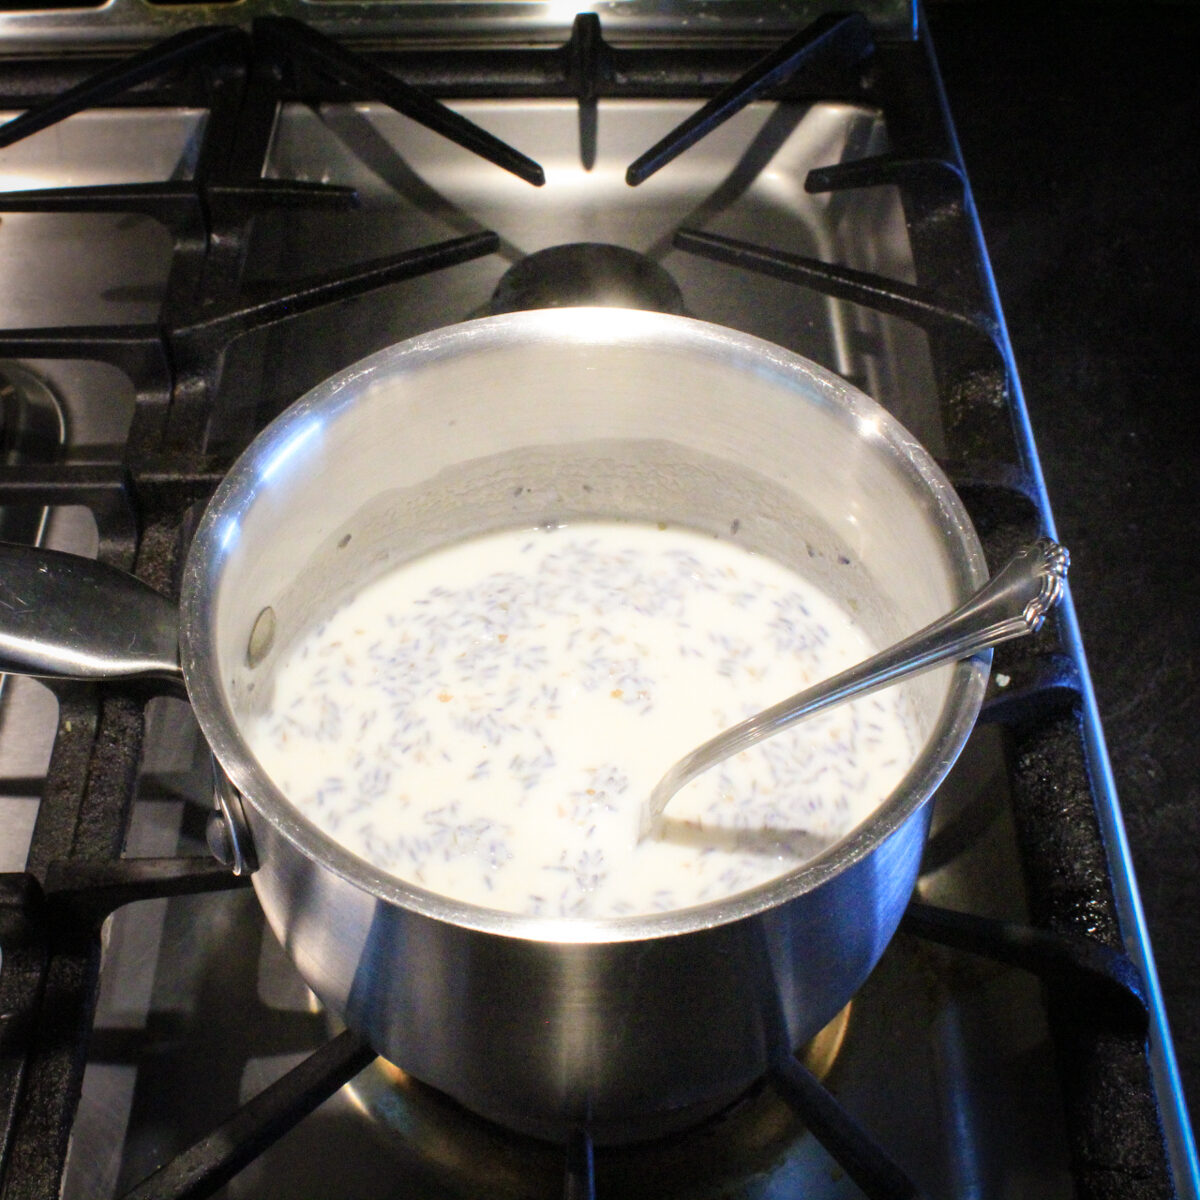 Milk and lavender buds stirred together in a stainless steel saucepan.